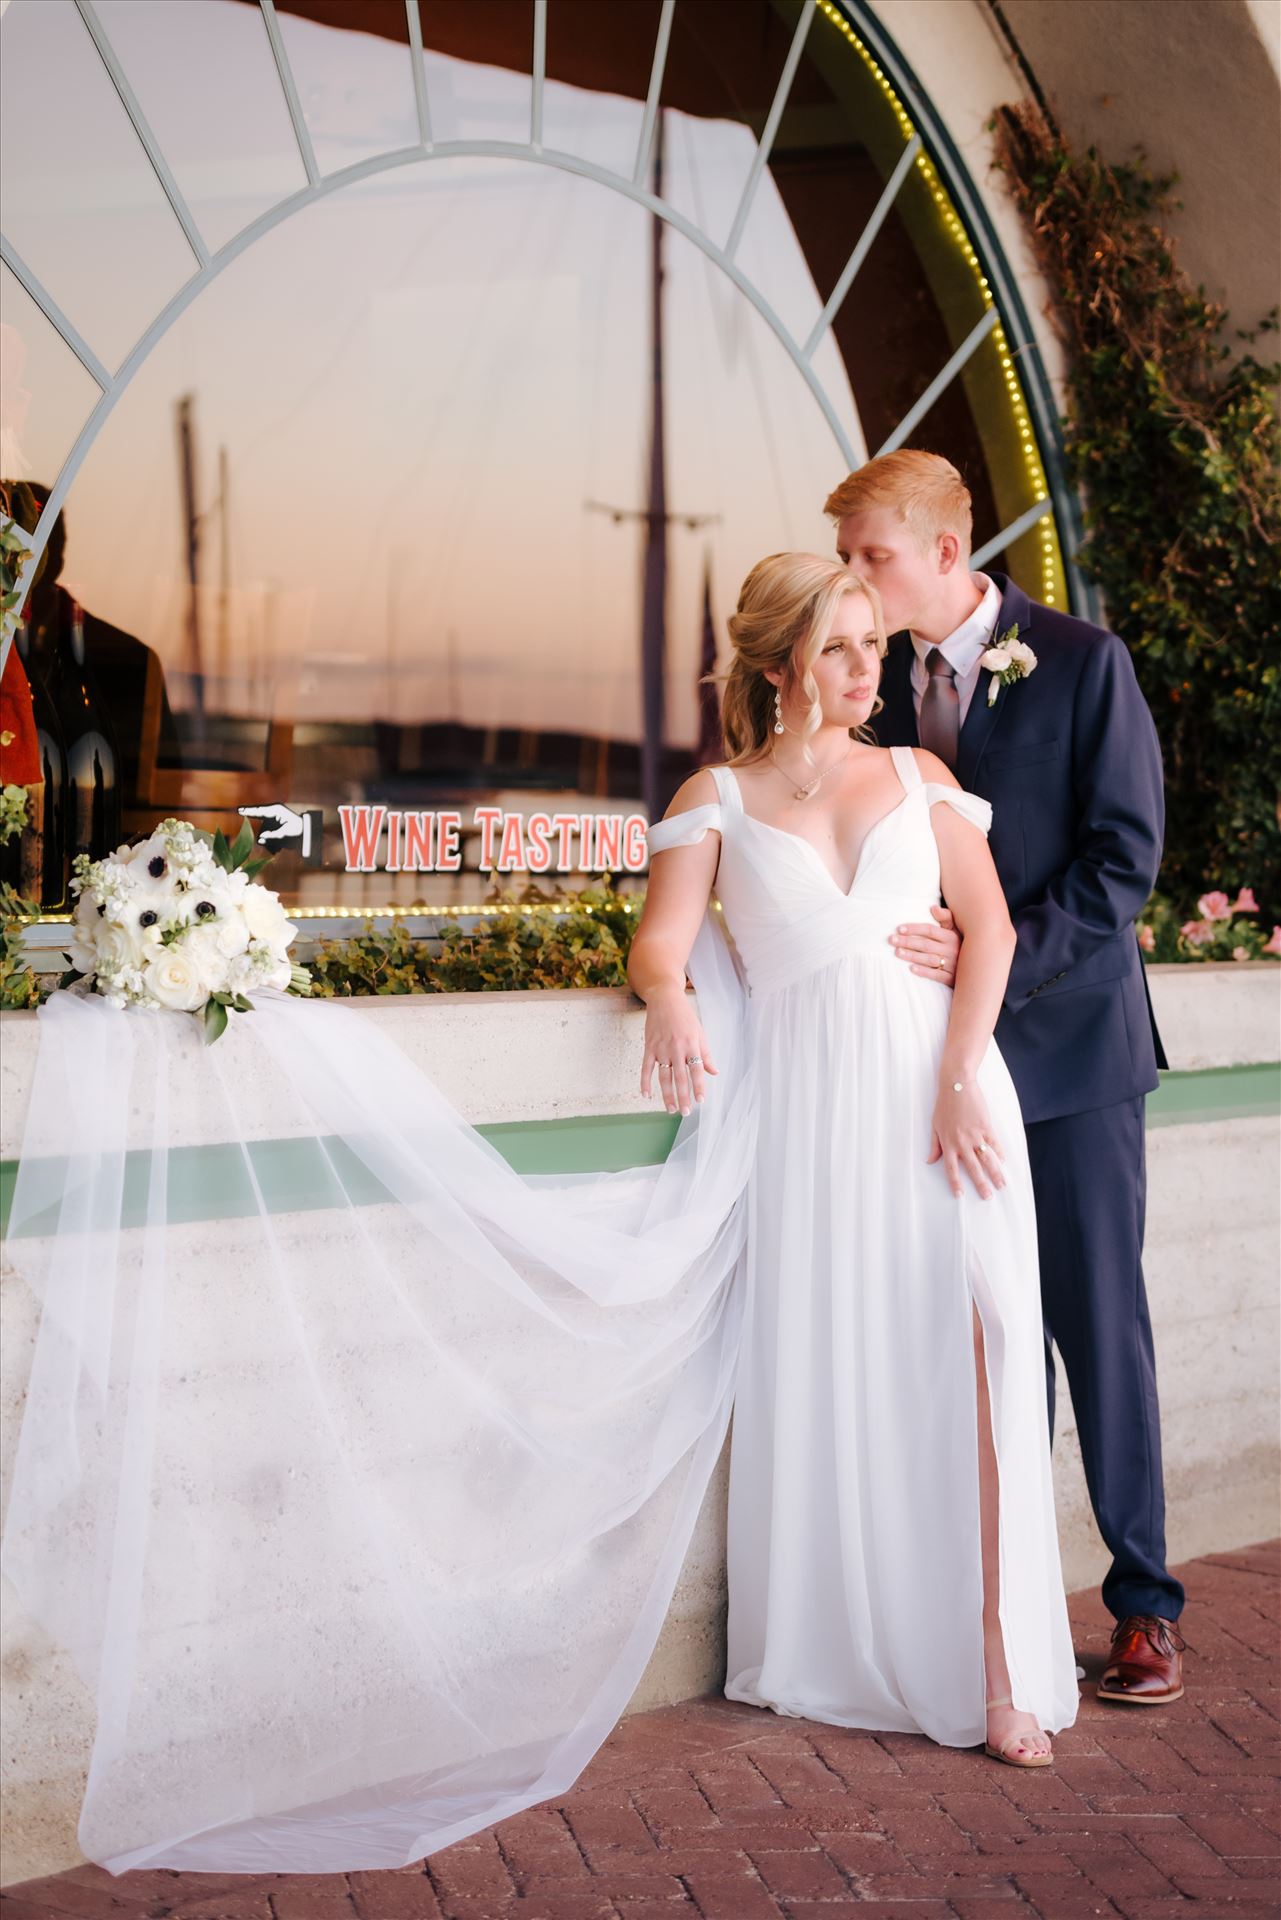 FW-8520.JPG - Sarah Williams of Mirror's Edge Photography, a San Luis Obispo Wedding and Engagement Photographer, captures Ryan and Joanna's wedding at the iconic Windows on the Water Restaurant in Morro Bay, California.  Bride and Groom at sunset by Sarah Williams